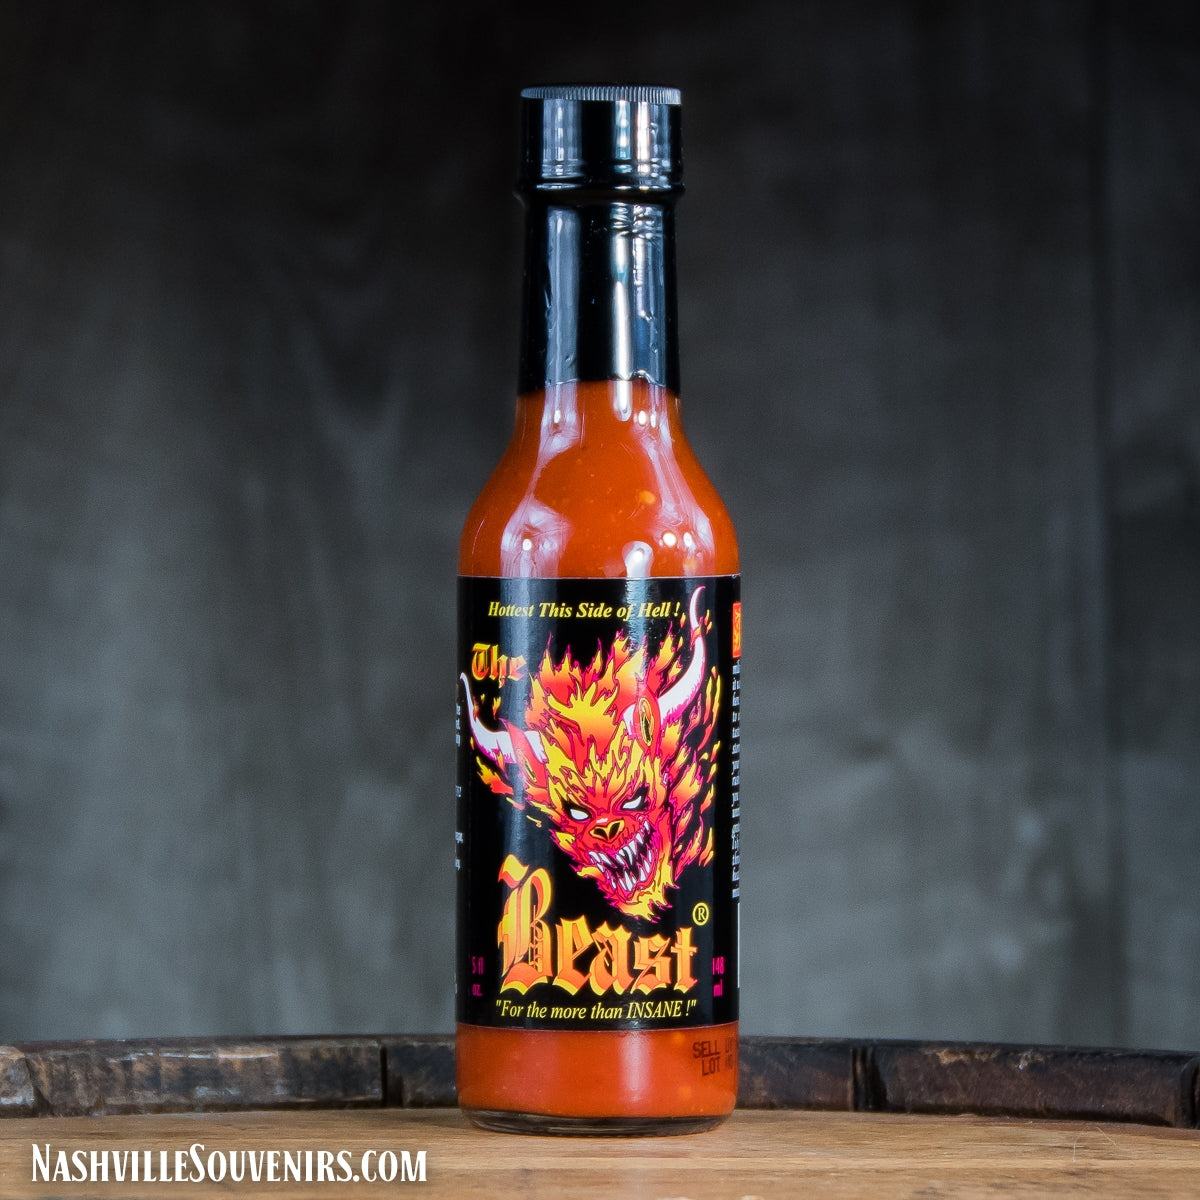 Be afraid, be very afraid! The Beast - 1st Place Winner National Fiery Food Challenge. It's XXXscreamly hot!!! FREE SHIPPING on all US orders over $75!